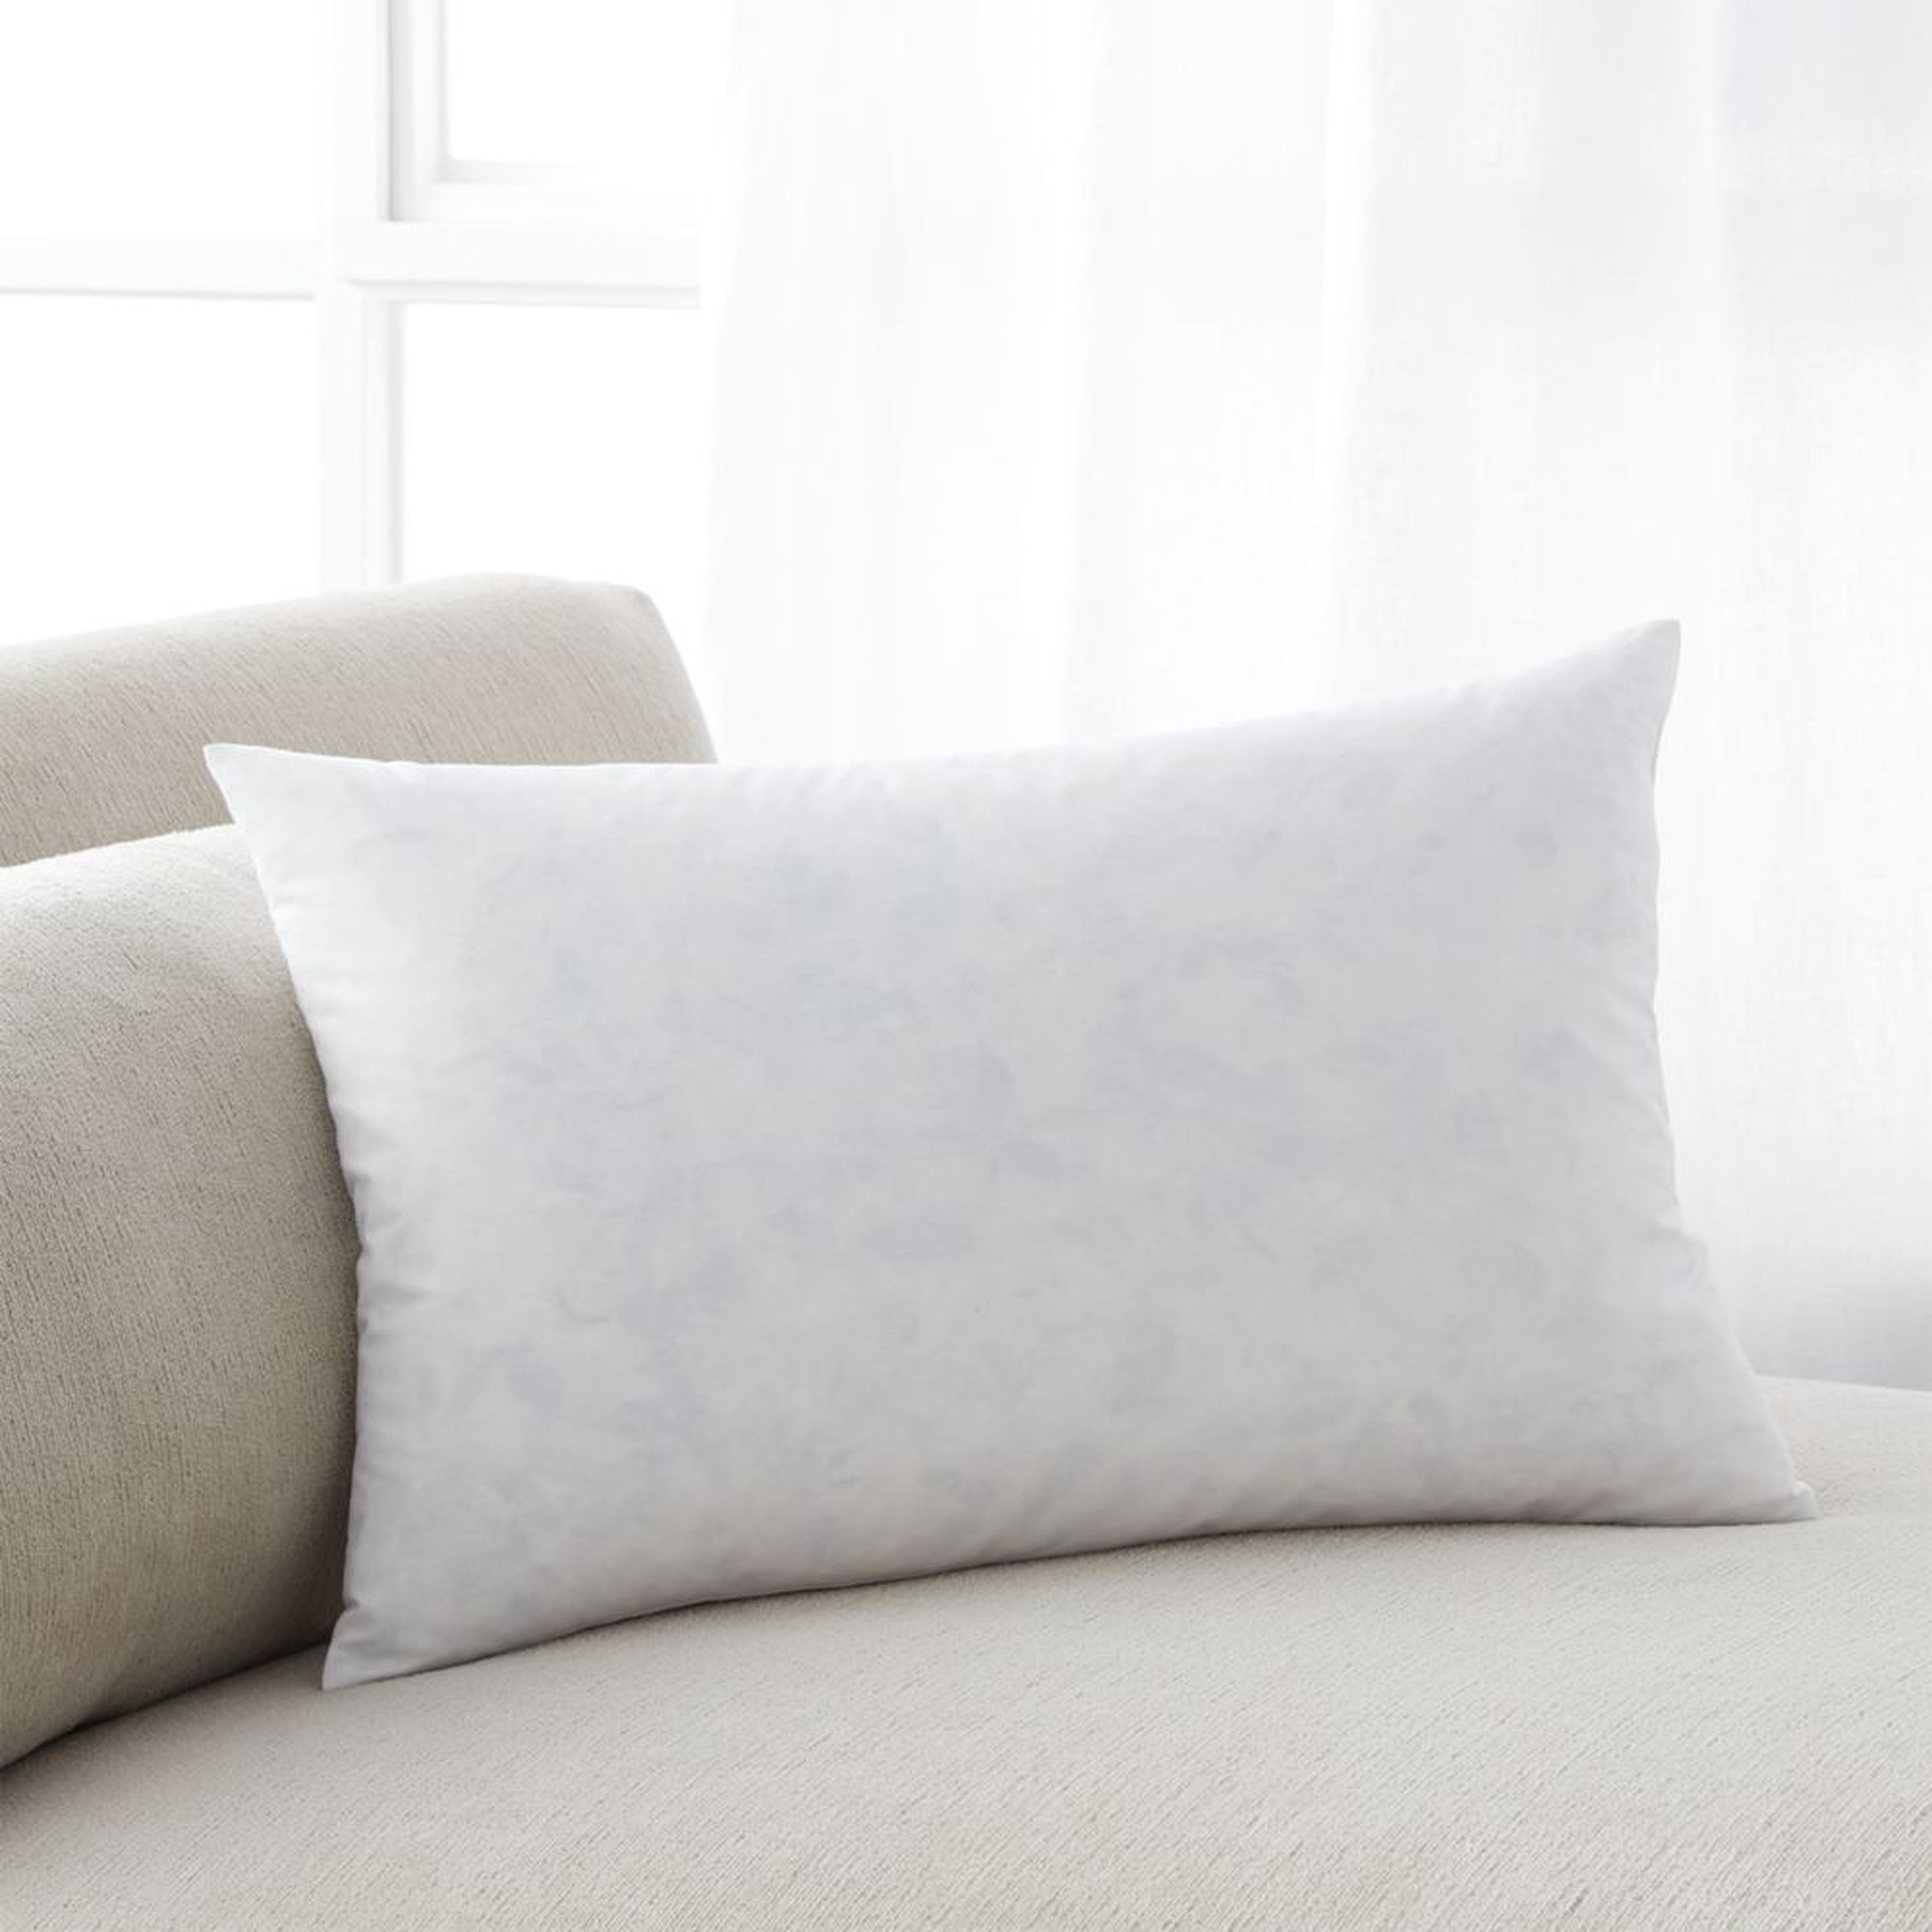 Feather-Down 18"x12" Pillow Insert - Crate and Barrel